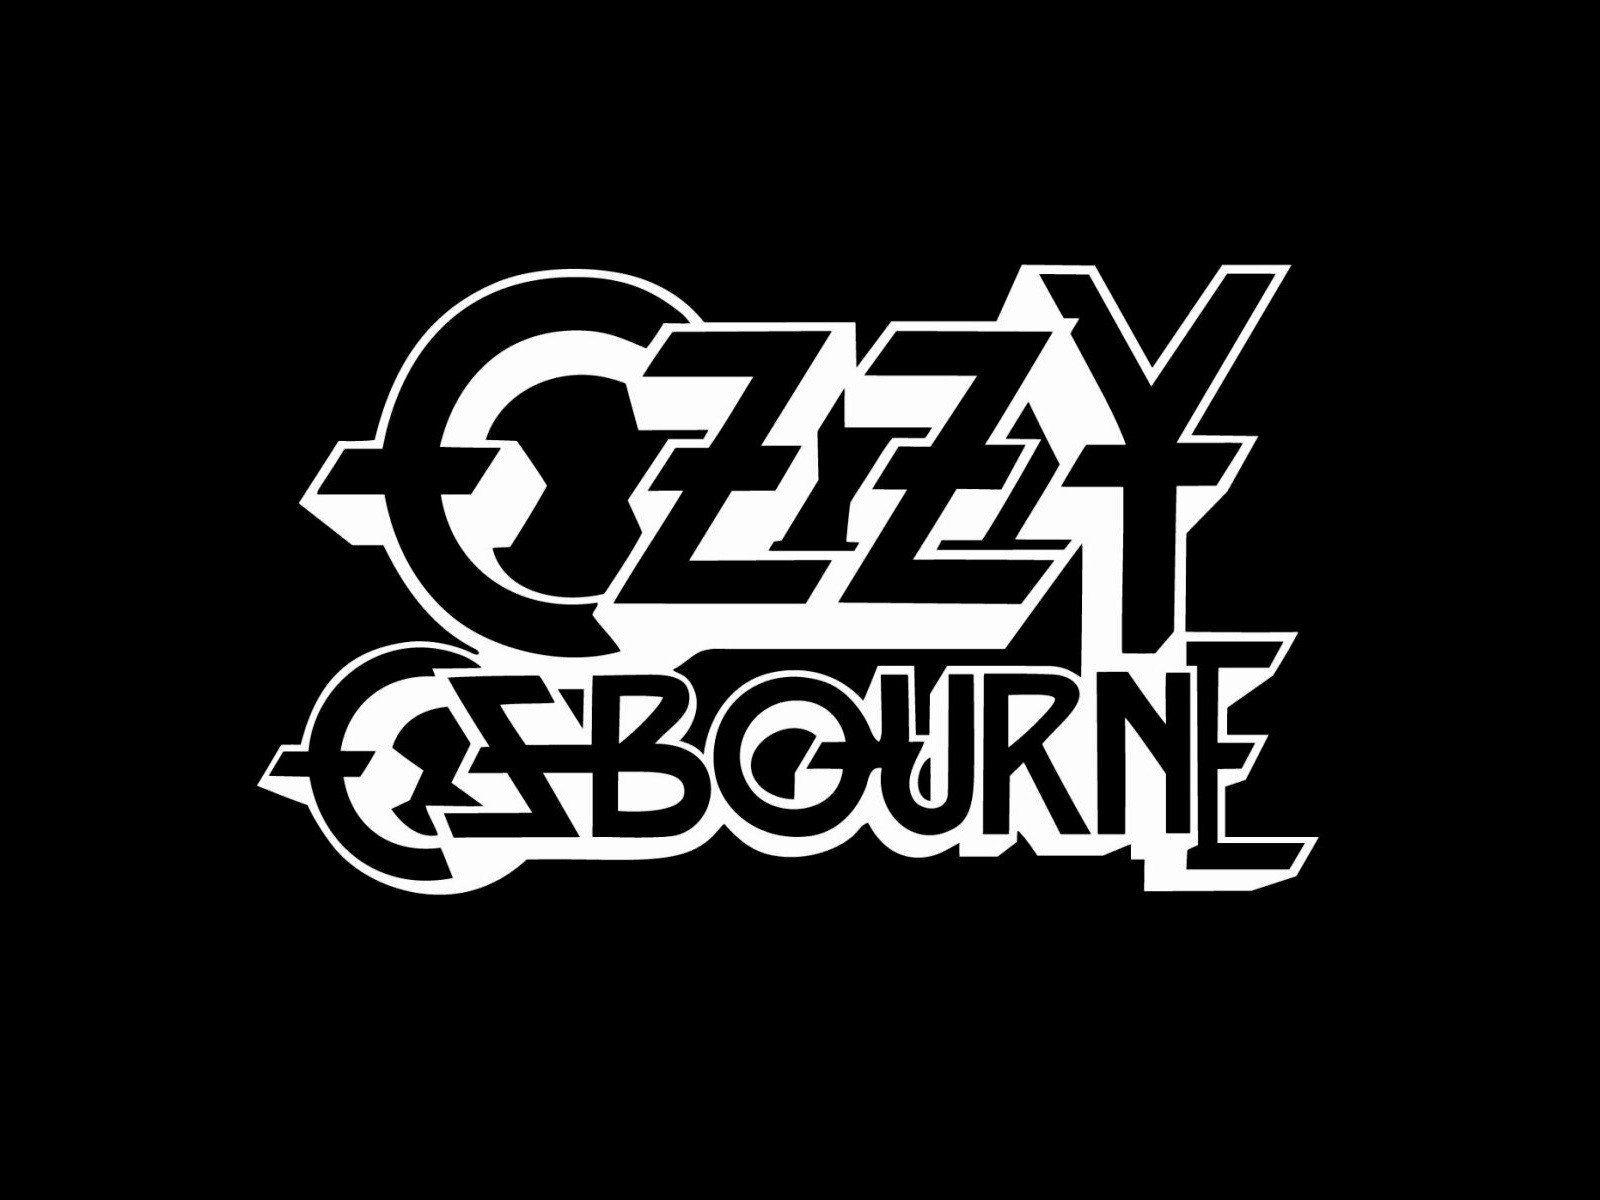 20 Ozzy Osbourne HD Wallpapers and Backgrounds